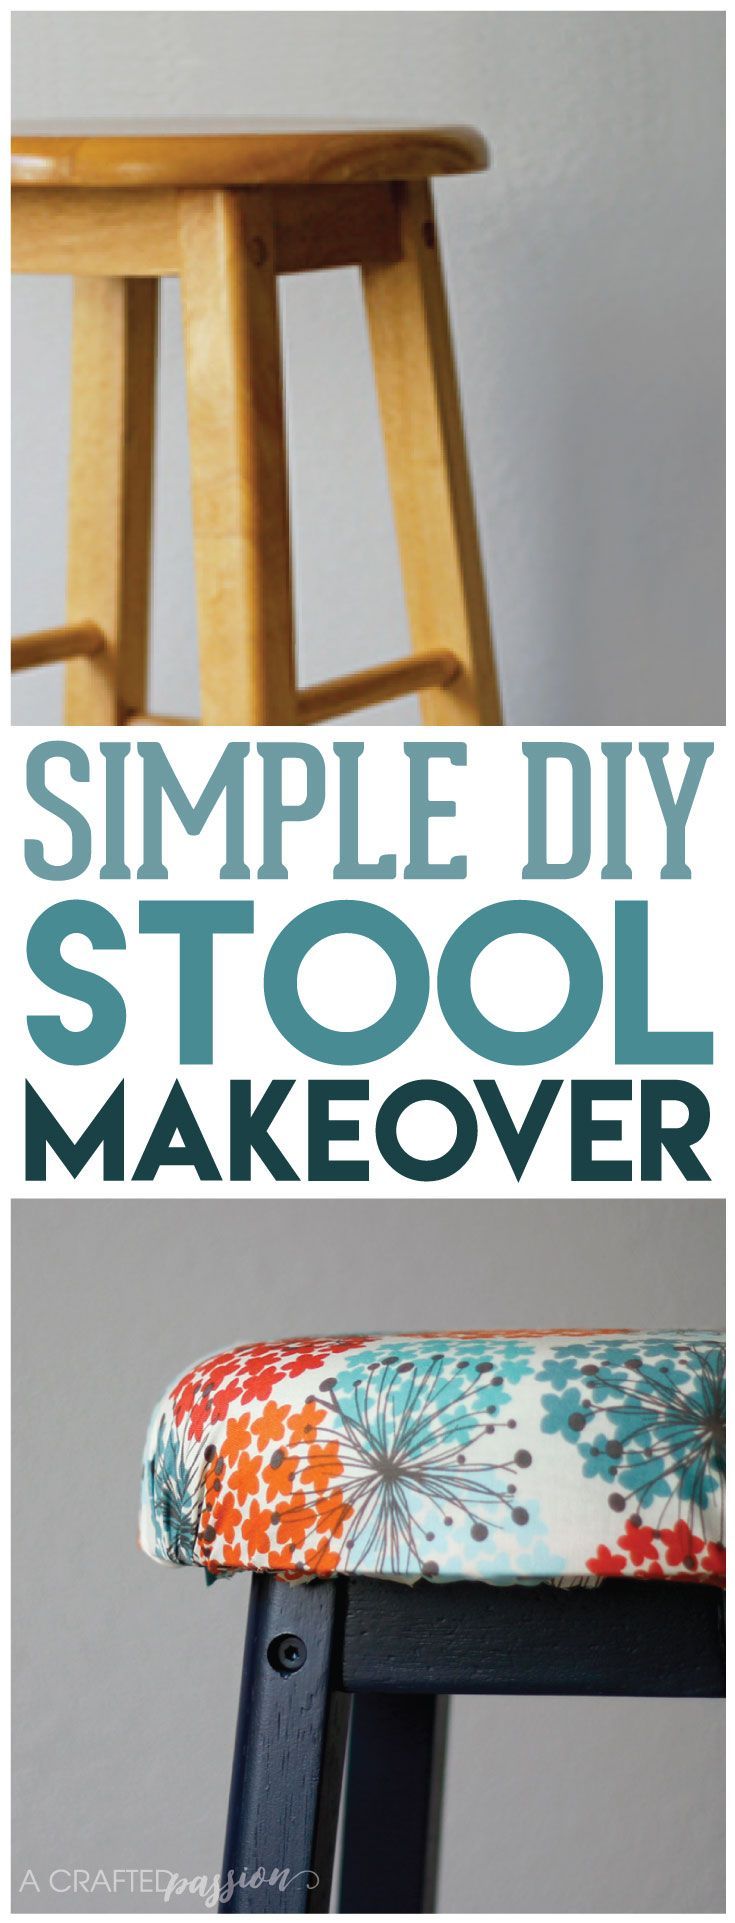 Bar stool makeover - All you need is a little paint, foam, fabric, and some TLC....